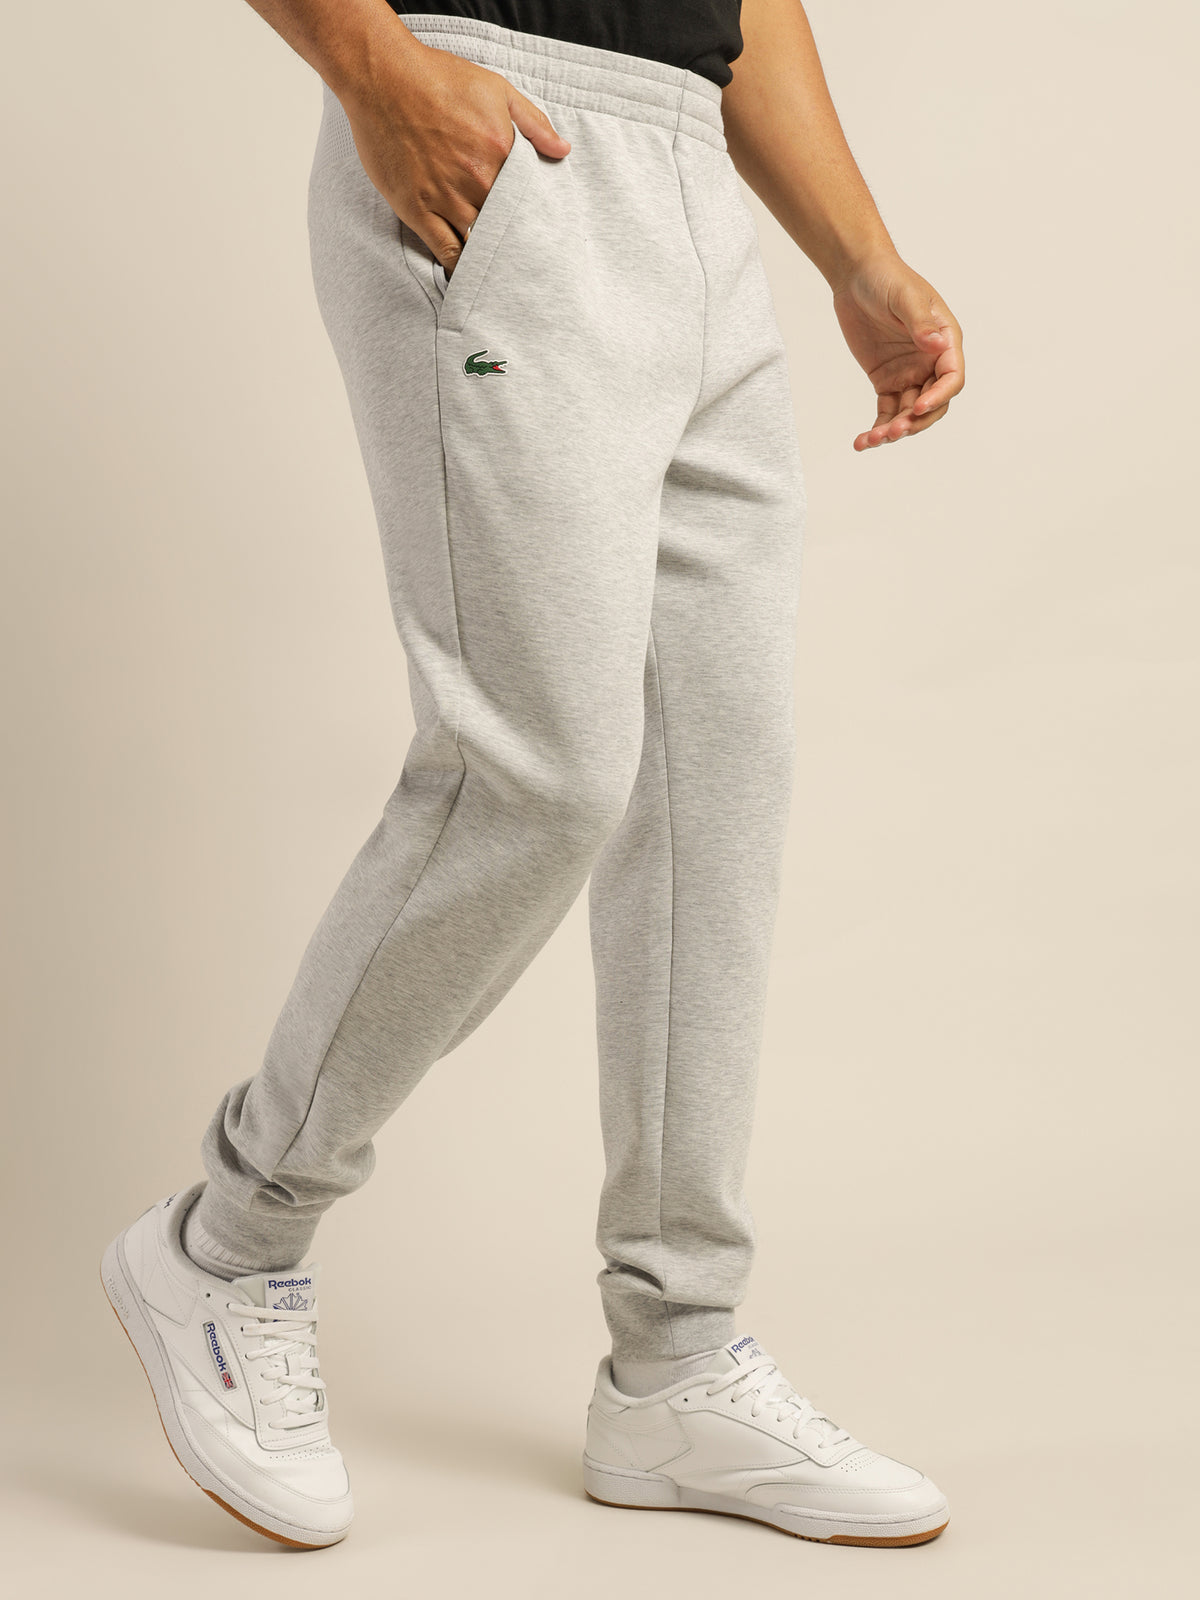 Performance Track Pants in Grey